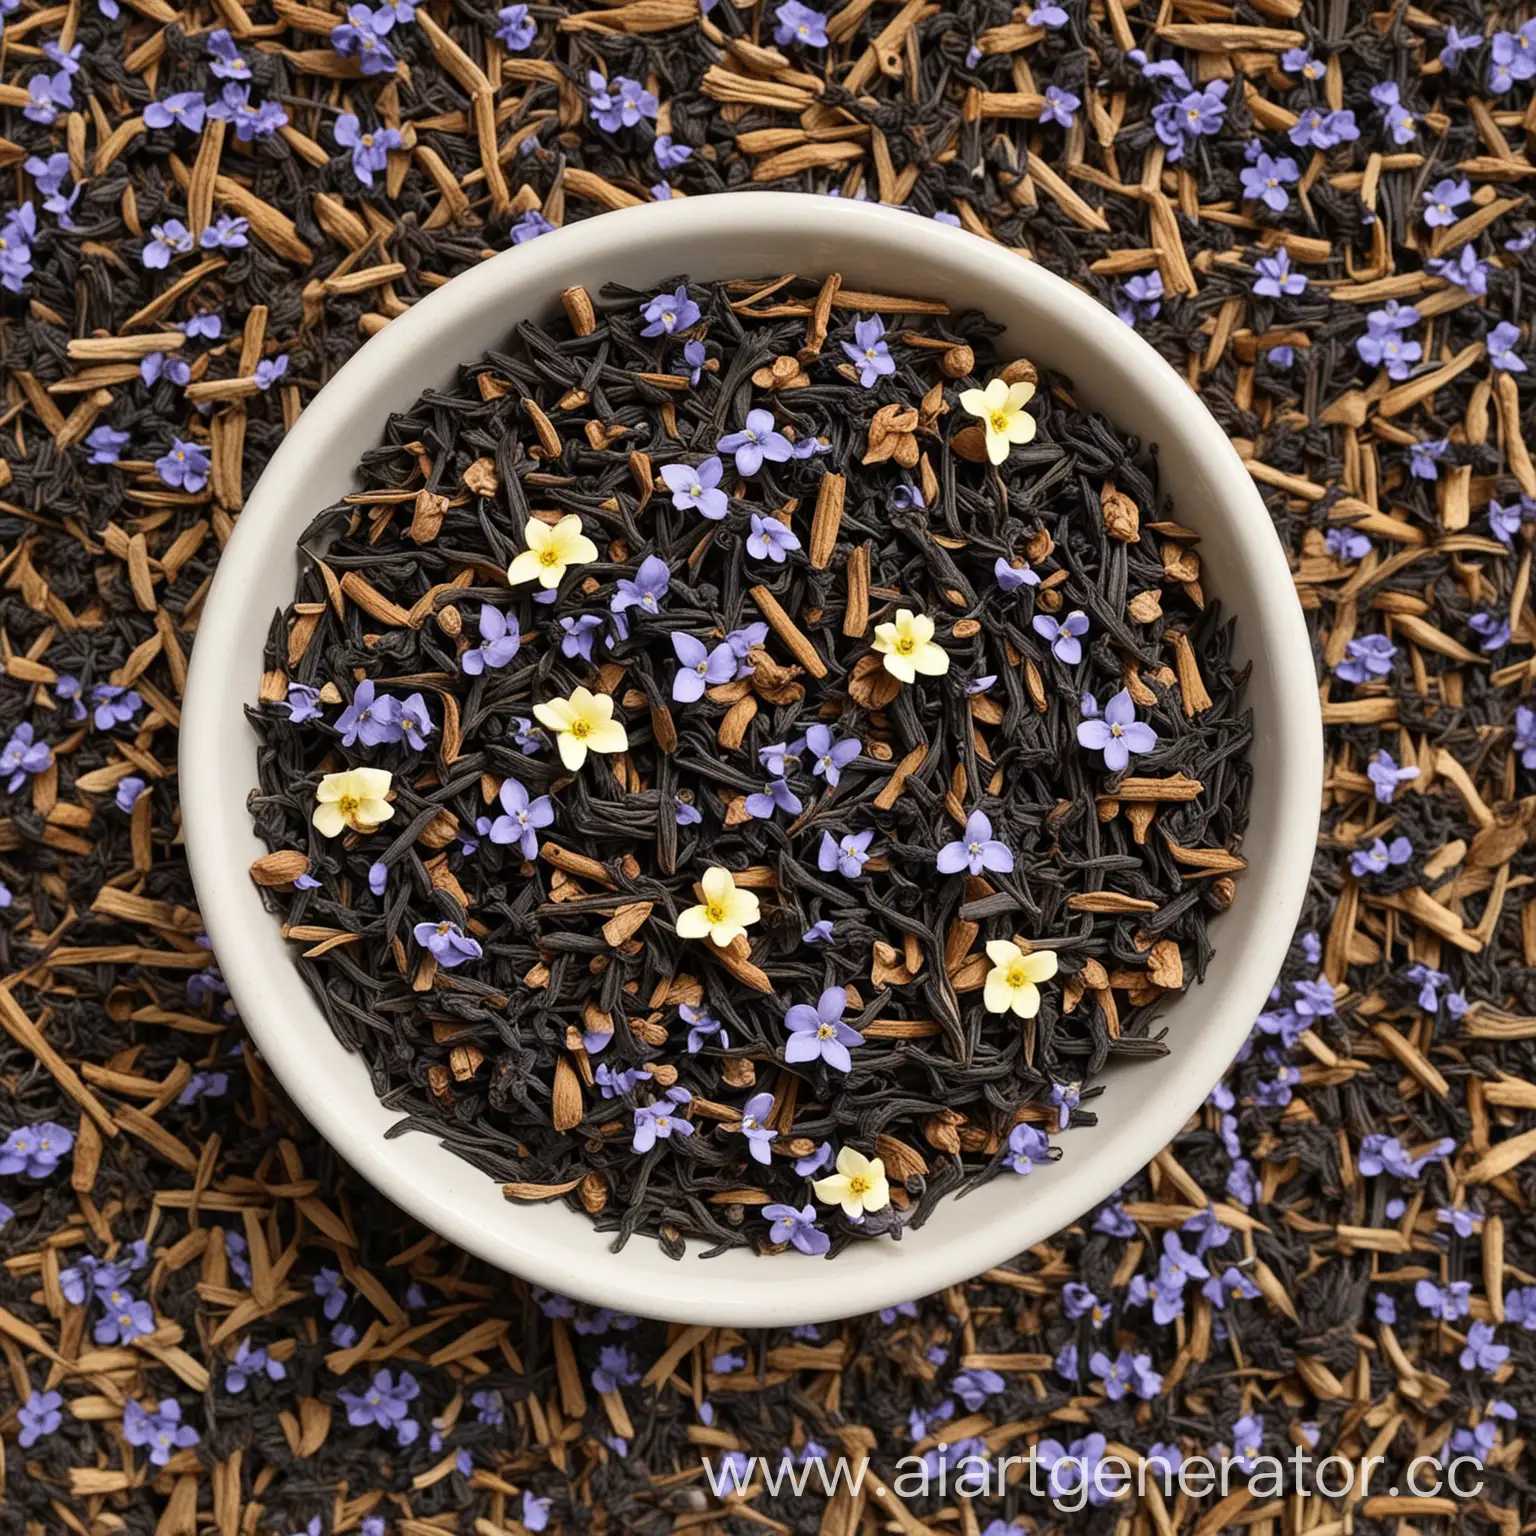 Lavender and Honey leaf tea The
honey-floral blend of Assam black tea is diluted with creamy notes of milk tea. The flowers of the forest forget-me-not give tart notes, the spice of lavender is intertwined with the sweetness of Ceylon cinnamon and granules of floral honey.